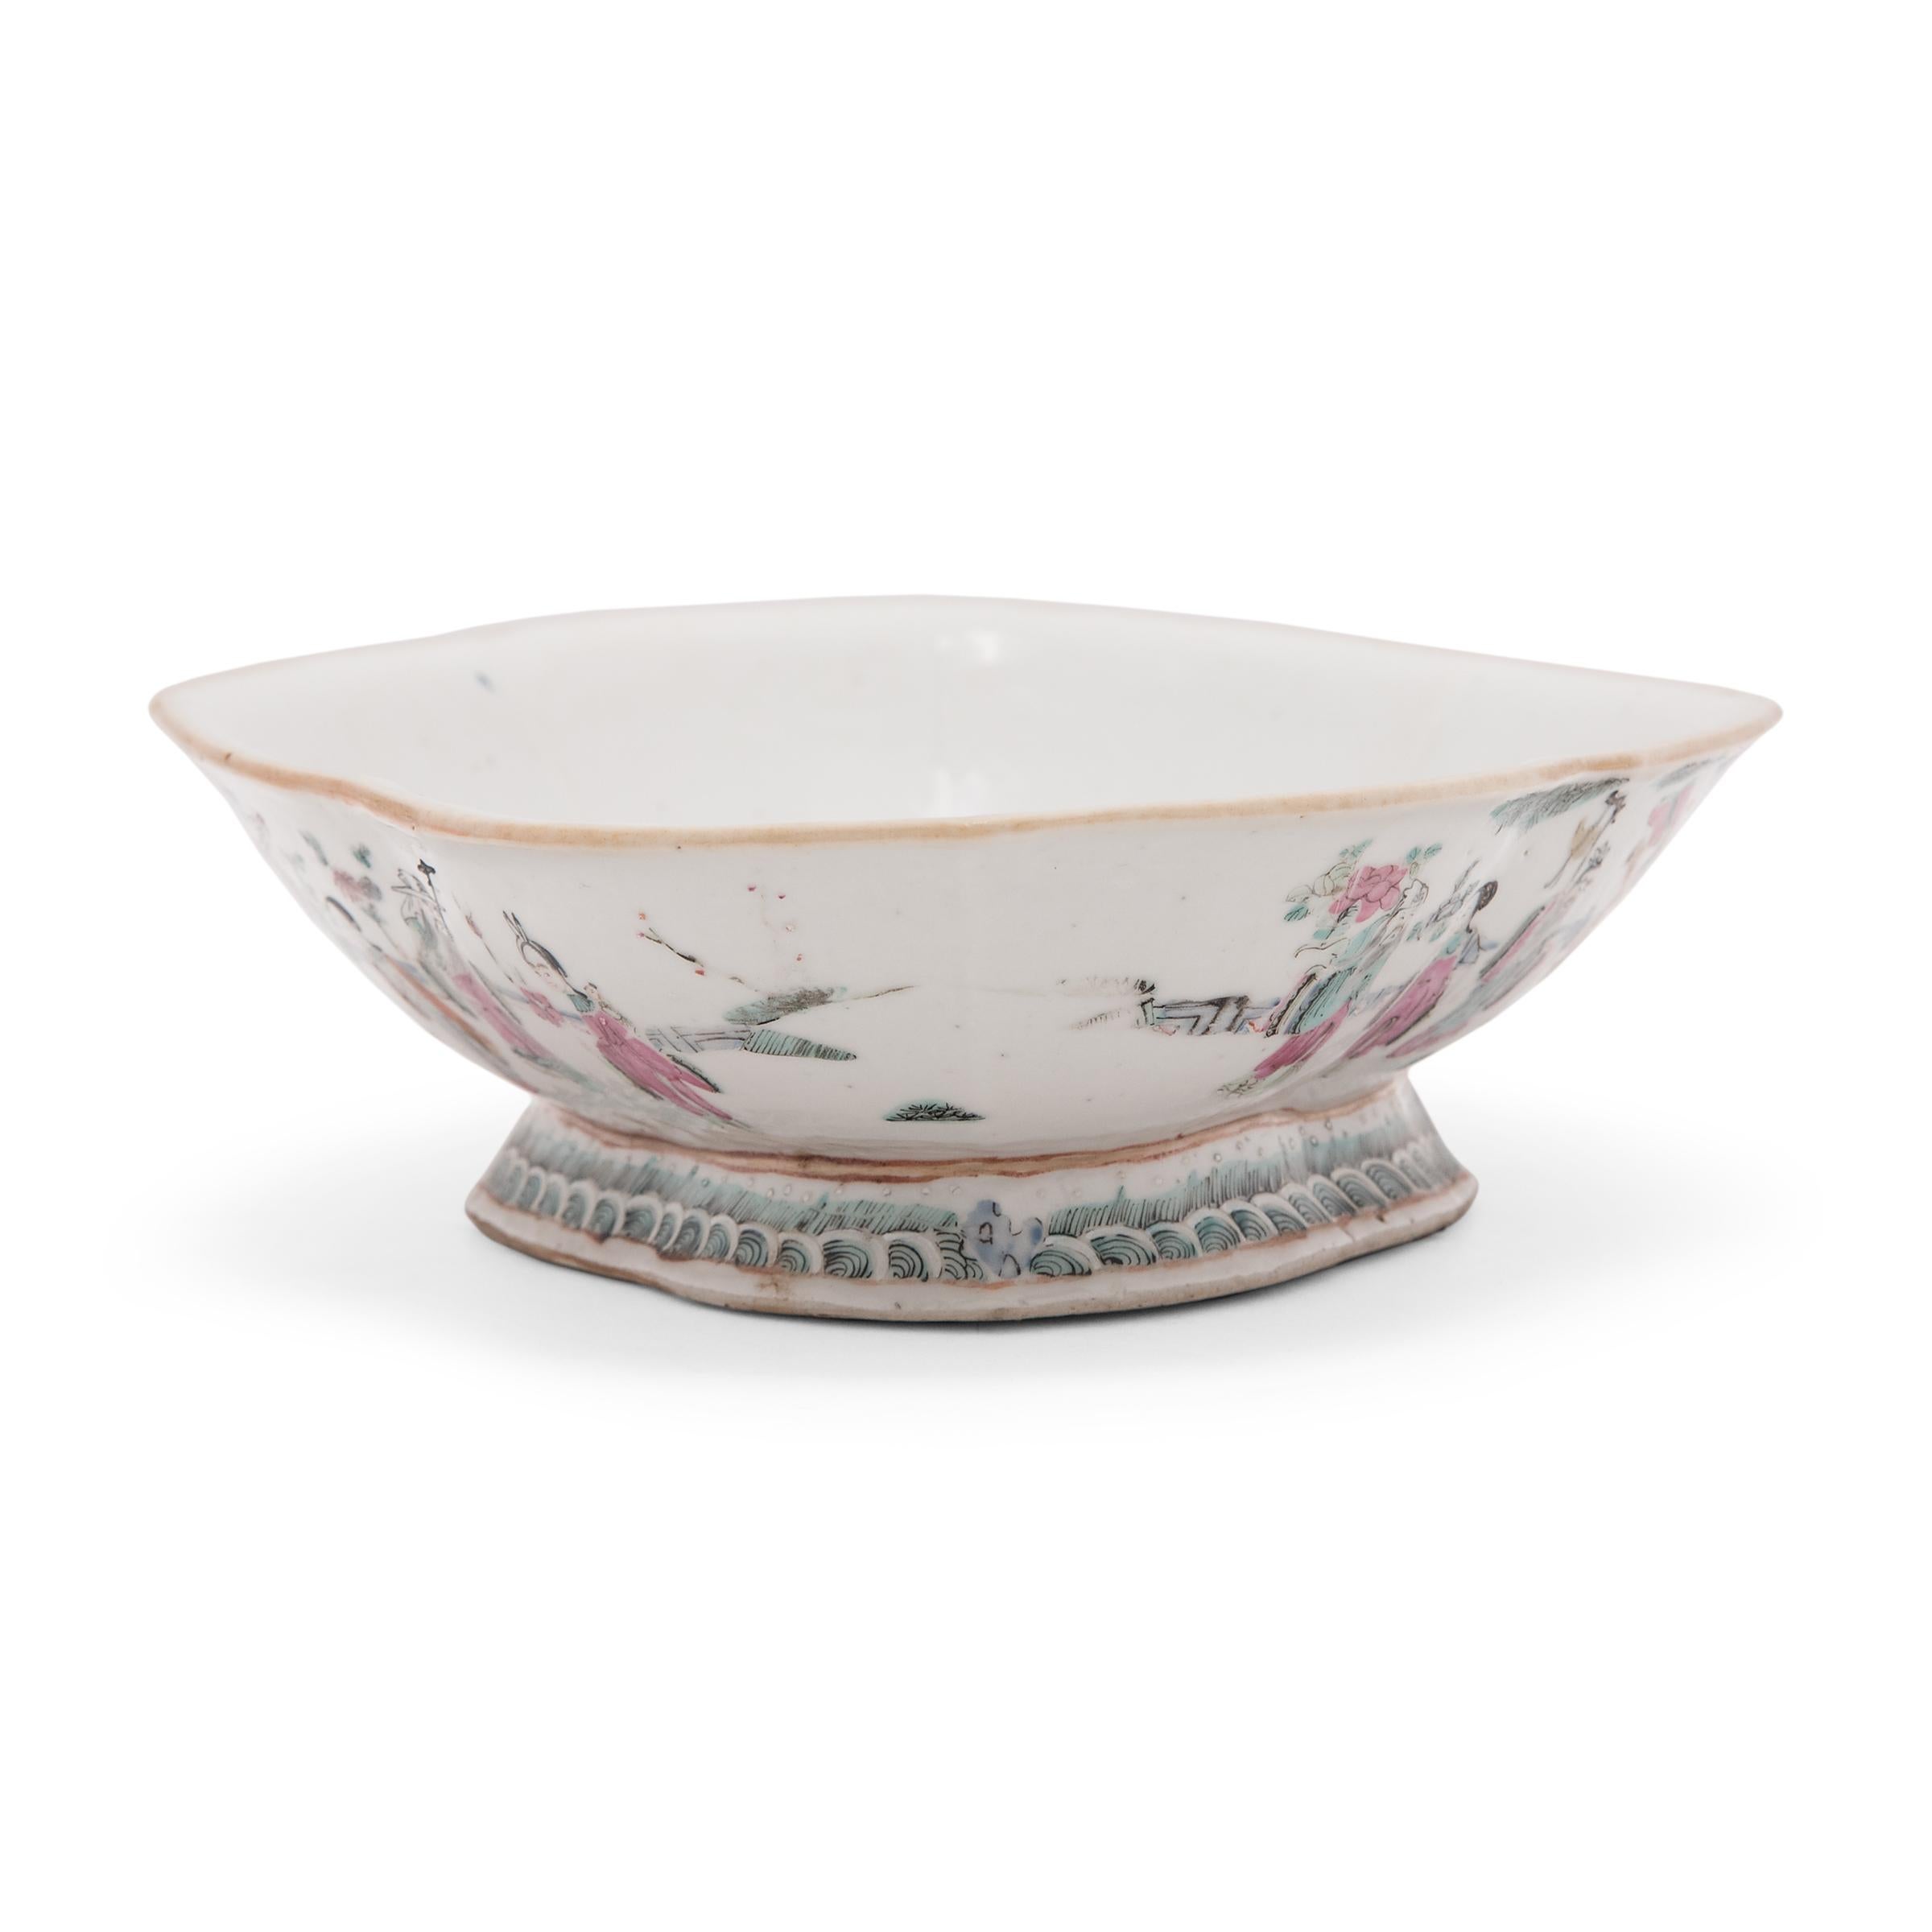 This colorful porcelain bowl dates to the mid-19th century and was originally used as a serving dish for ritual offerings, placed before a home altar and piled high with fruit, baked goods, and other foods. The cartouche-shaped dish features a short